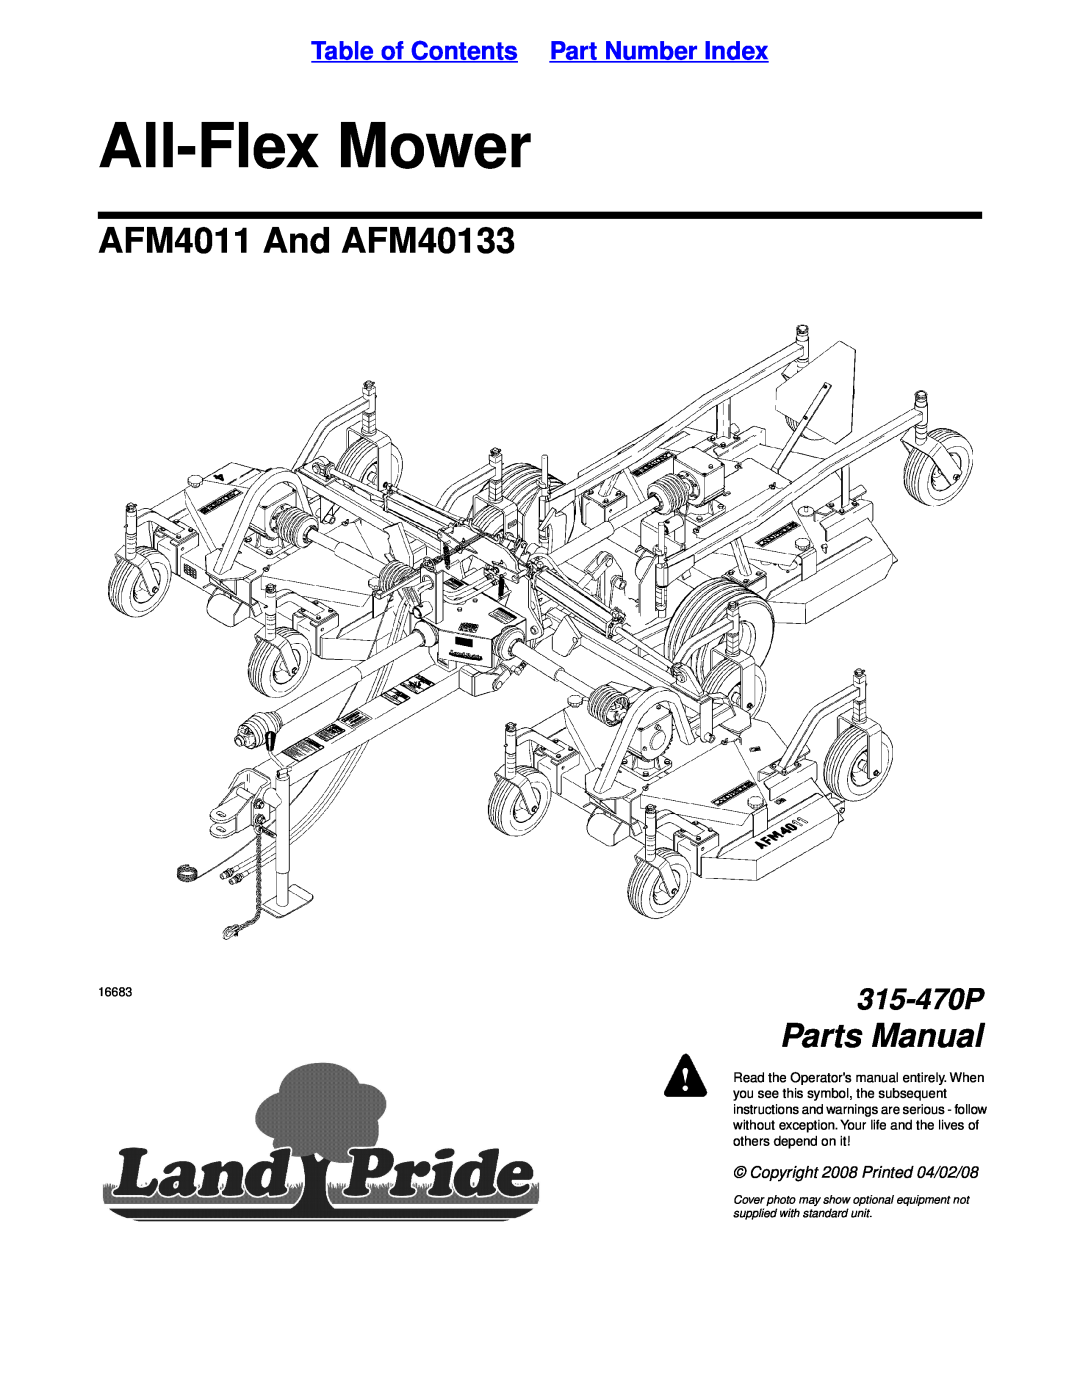 Land Pride manual Table of Contents Part Number Index, All-FlexMower, AFM4011 And AFM40133, Parts Manual, 315-470P 